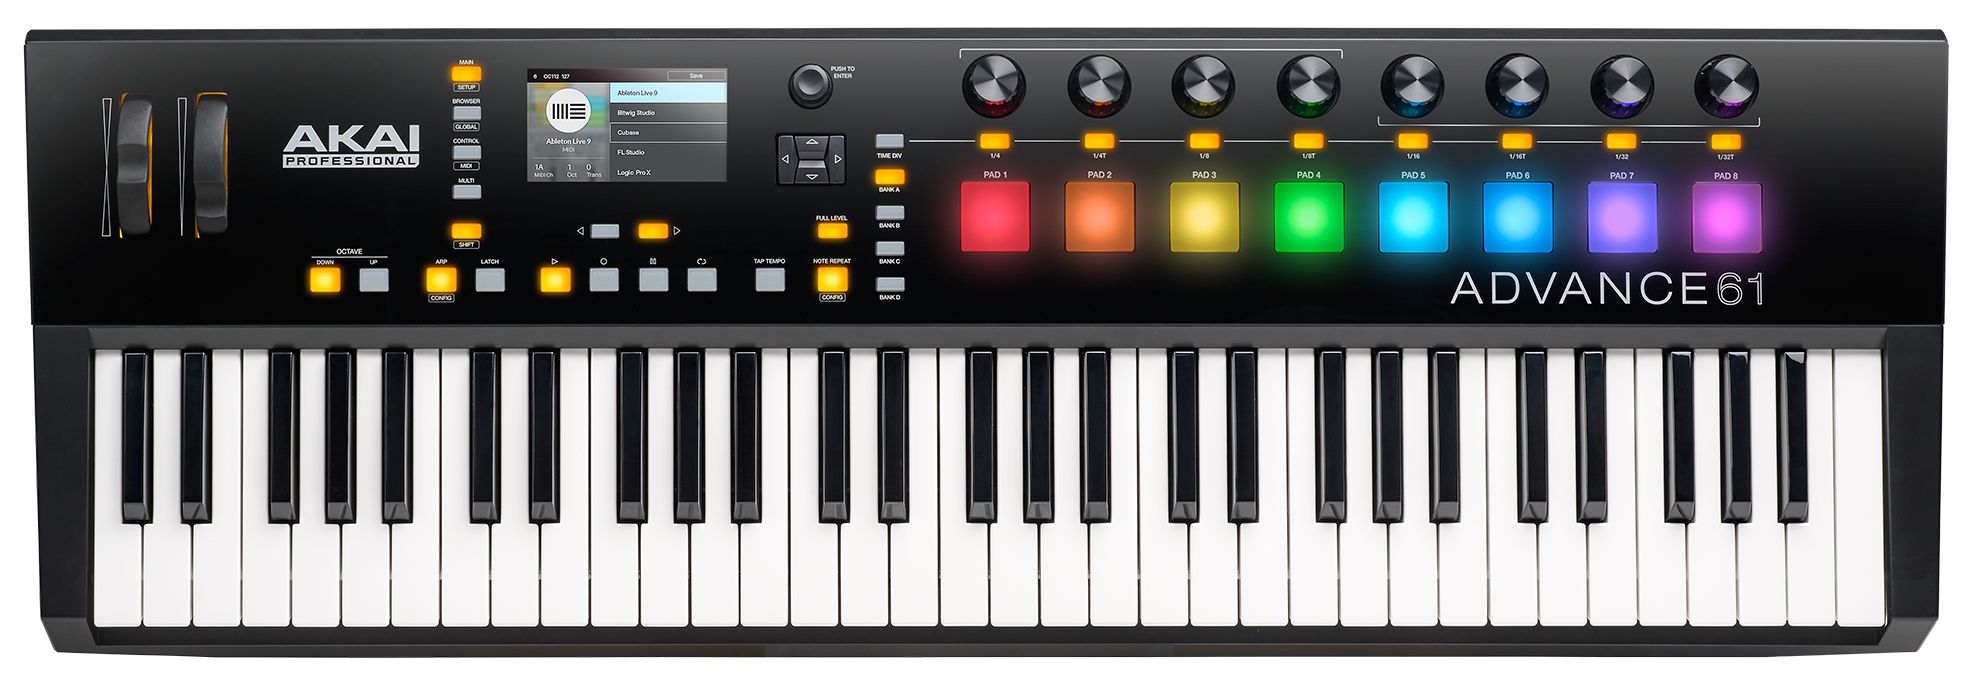 And finally we have the Akai Pro Advance 61.